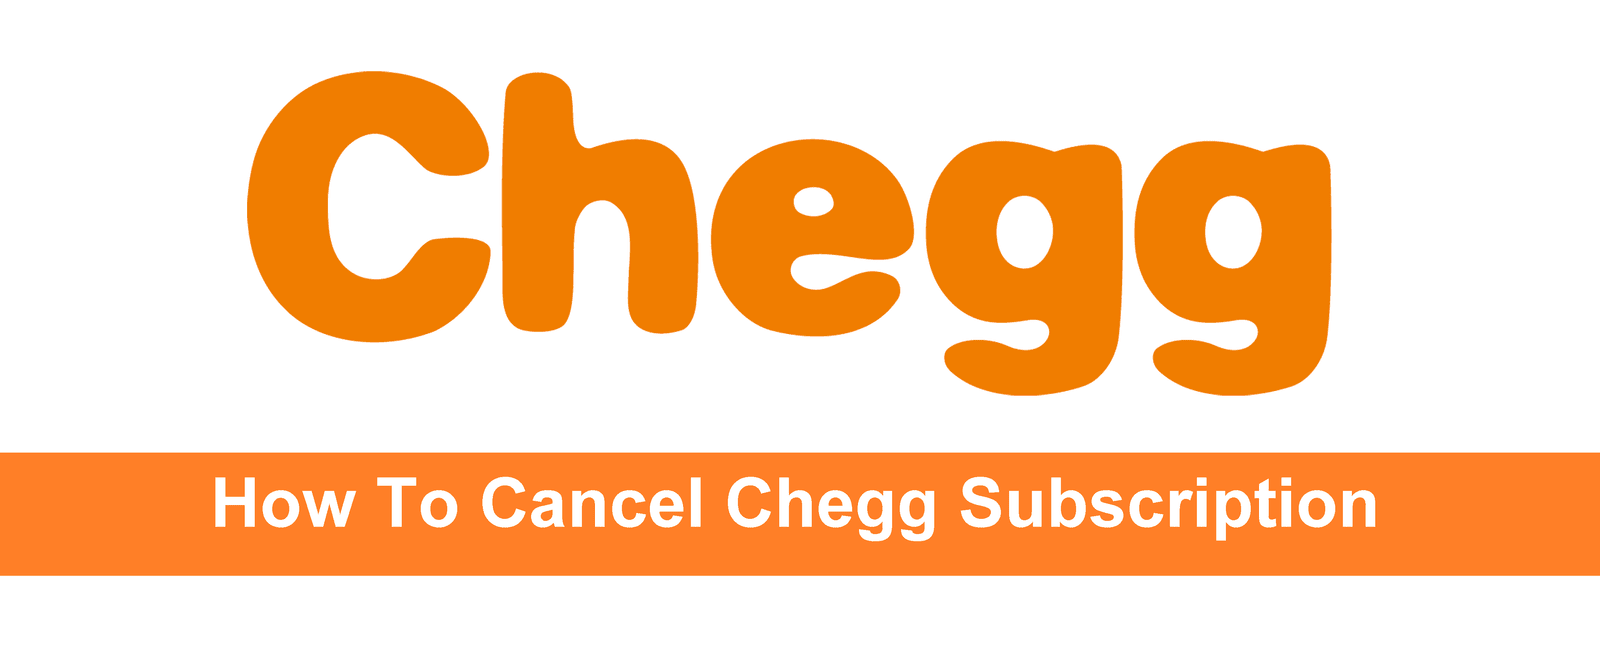 How To Cancel Chegg Subscription